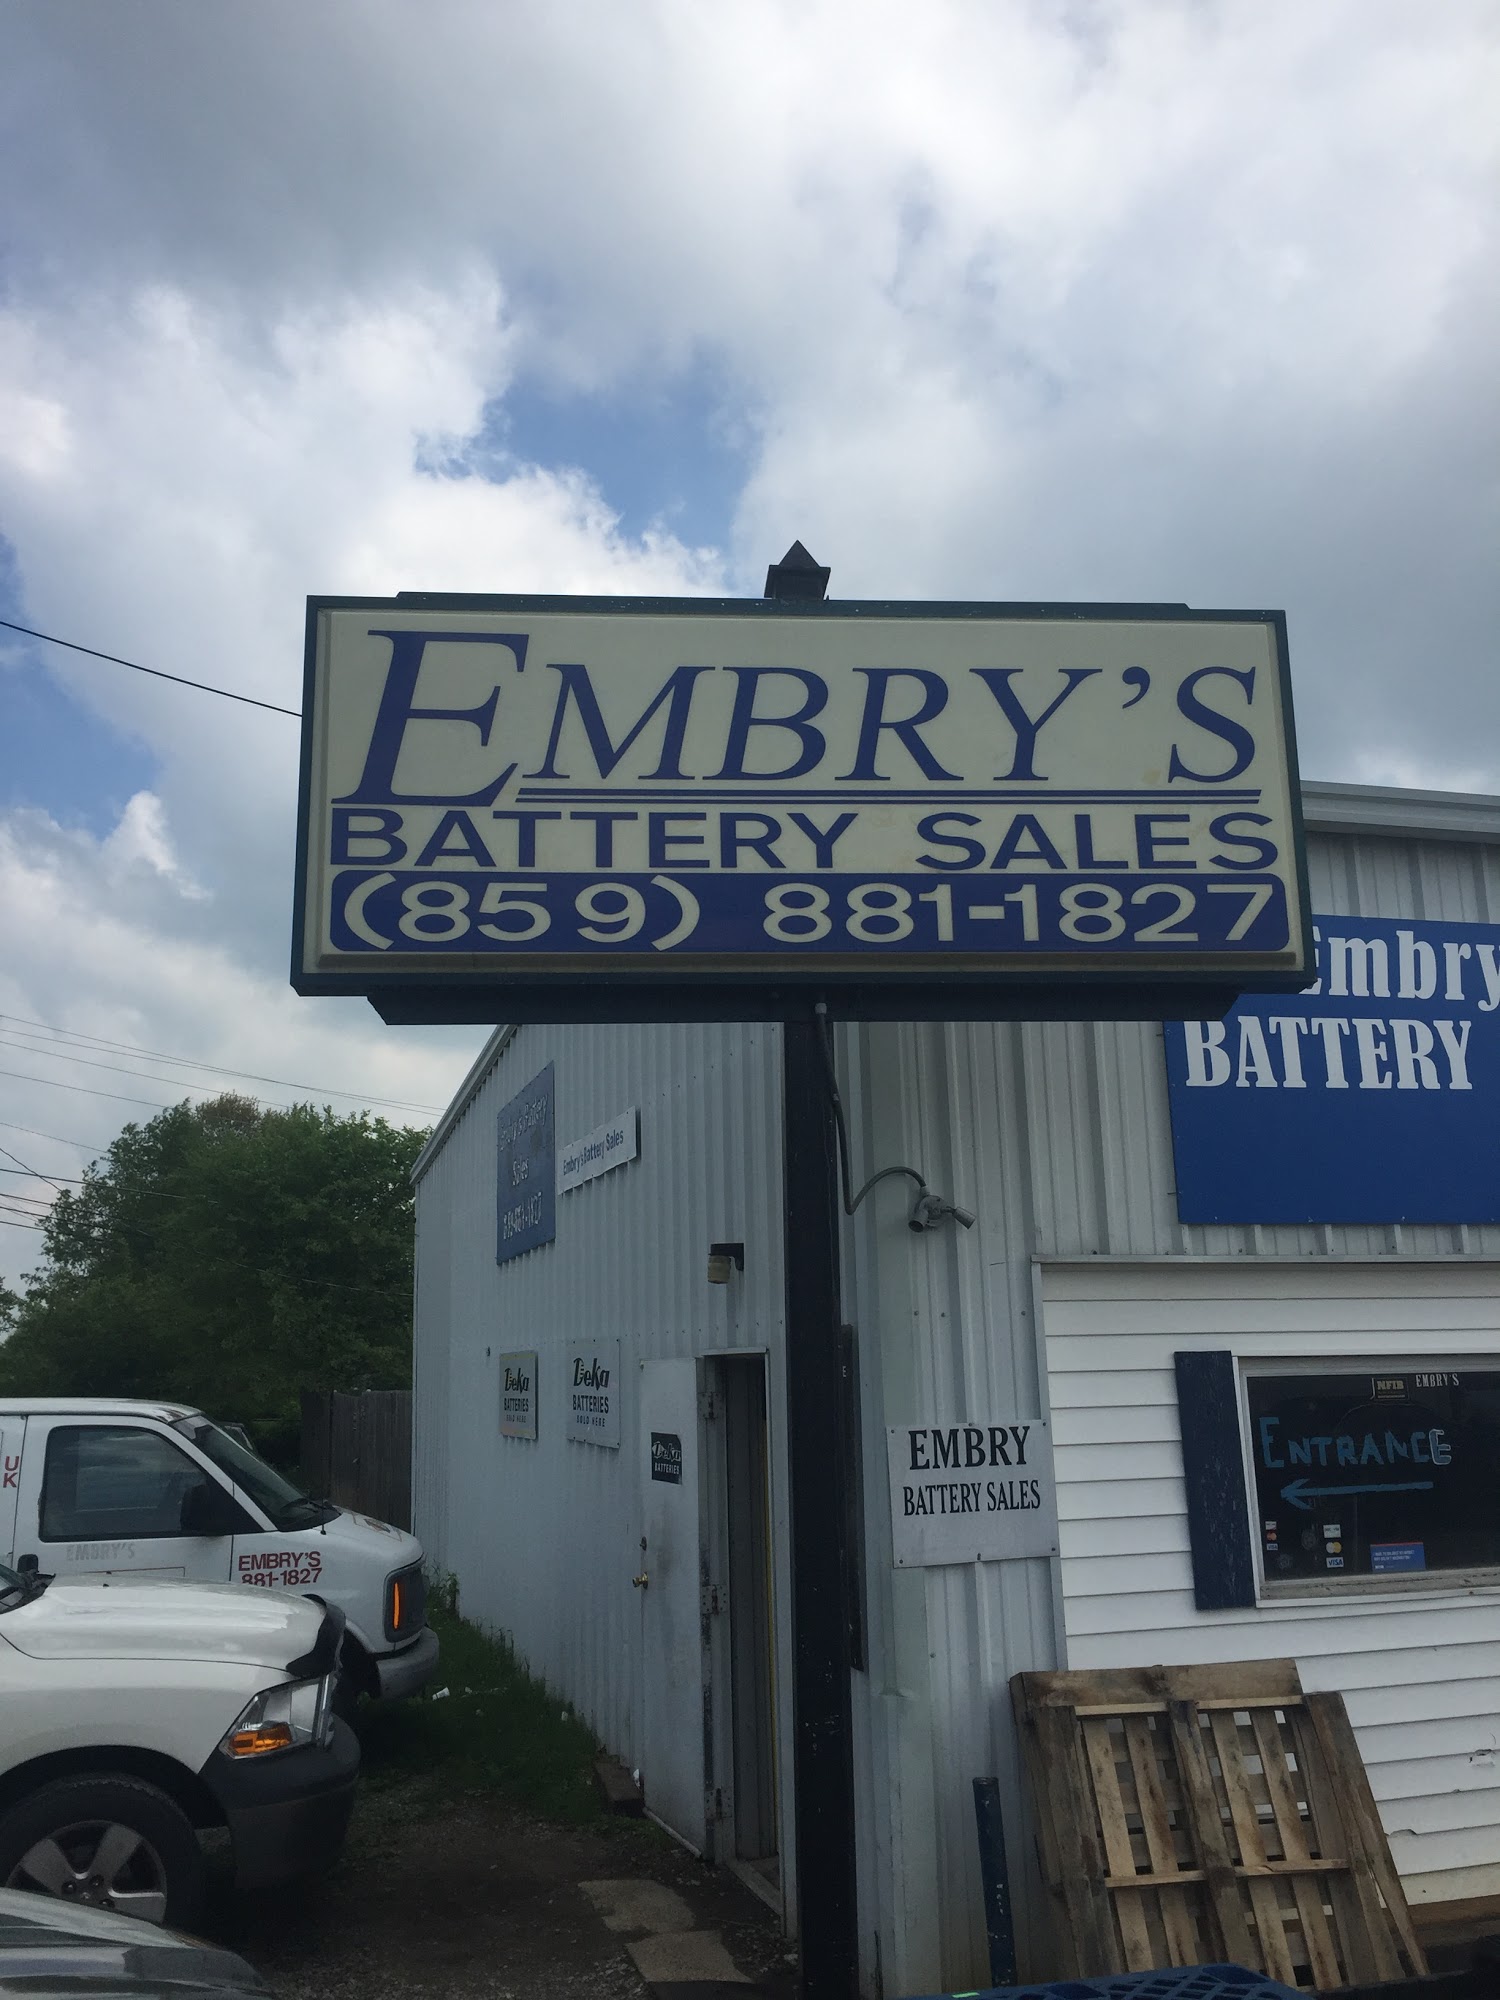 Embry's Battery Sales